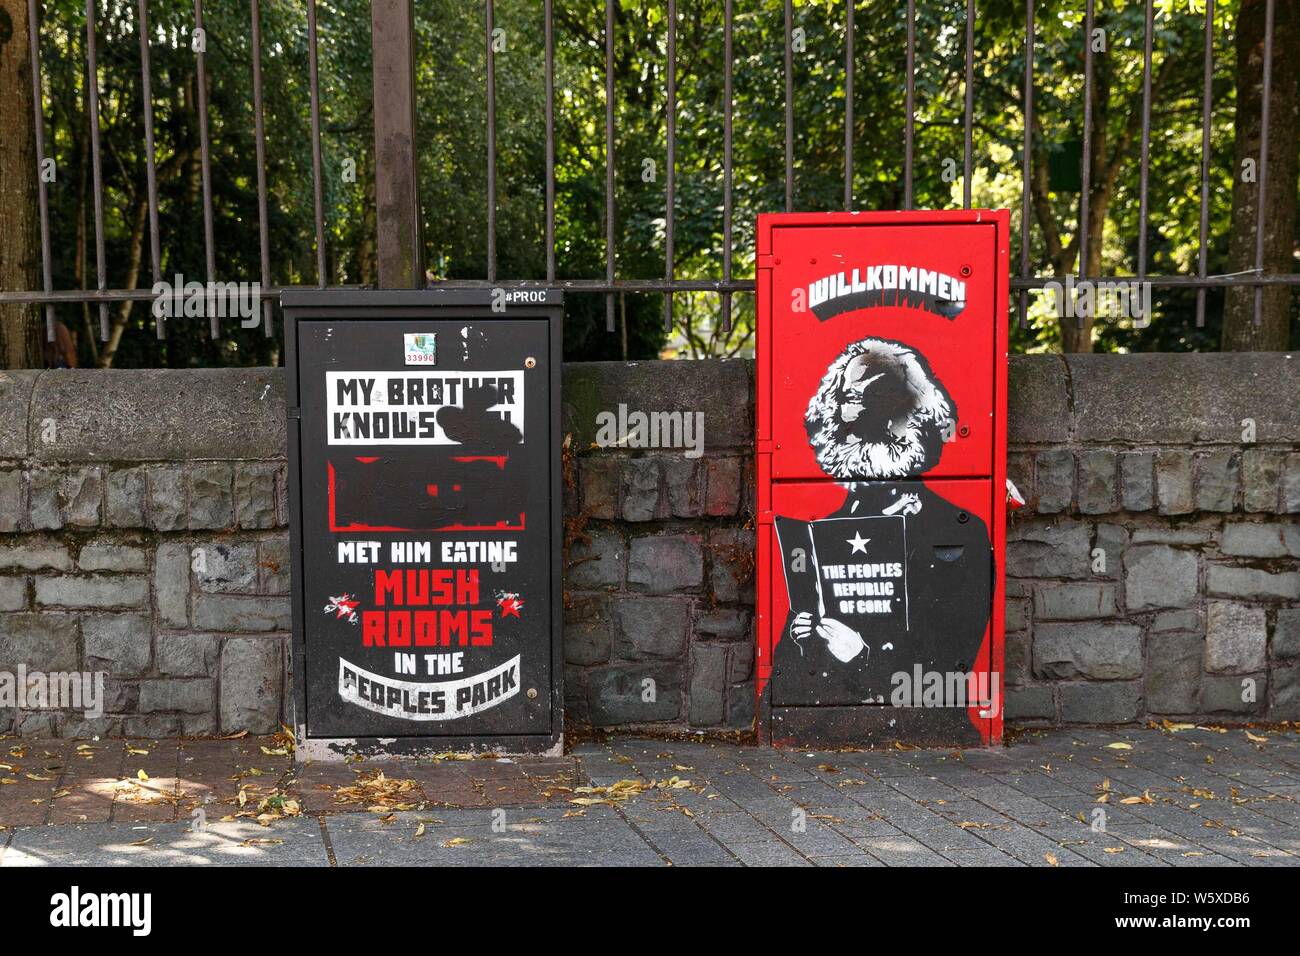 Cork, Ireland, 30 July , 2019.   Reimagine Cork Electricity Box Vandalised, Cork City. The electricity box located on Grand Parade outside Bishop Lucey Park was recently vandalised, the box which was painted in 2016 by Reimagine Cork was a tribute to Cork punk band, The Sultans of Ping FC. The song quotes lyrics from their song 'Where's My Jumper' and is accompanied by an image of philosopher and founder of Marxism, Karl Marx.  Credit: Damian Coleman Stock Photo